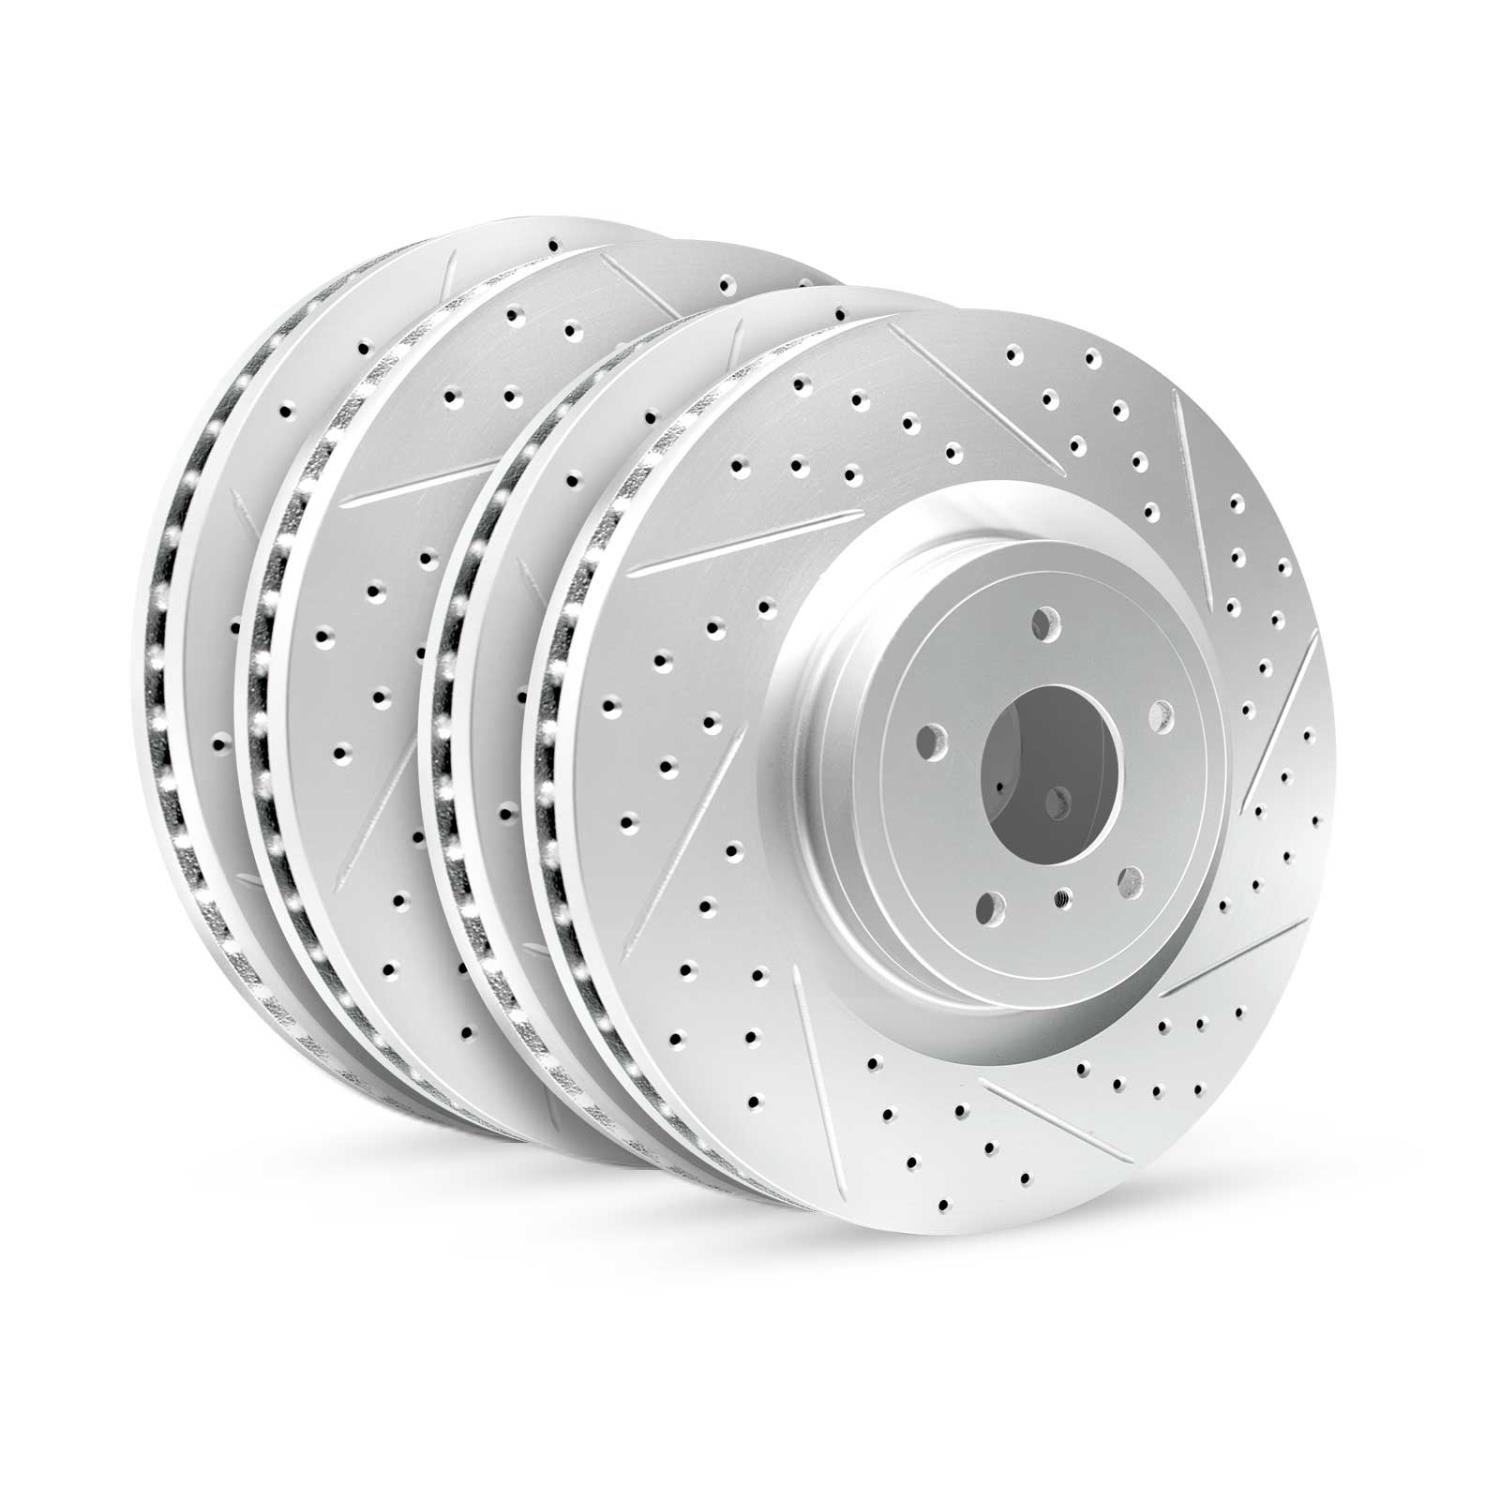 GEO-Carbon Drilled/Slotted Rotors, 2007-2017 Lexus/Toyota/Scion, Position: Front/Rear